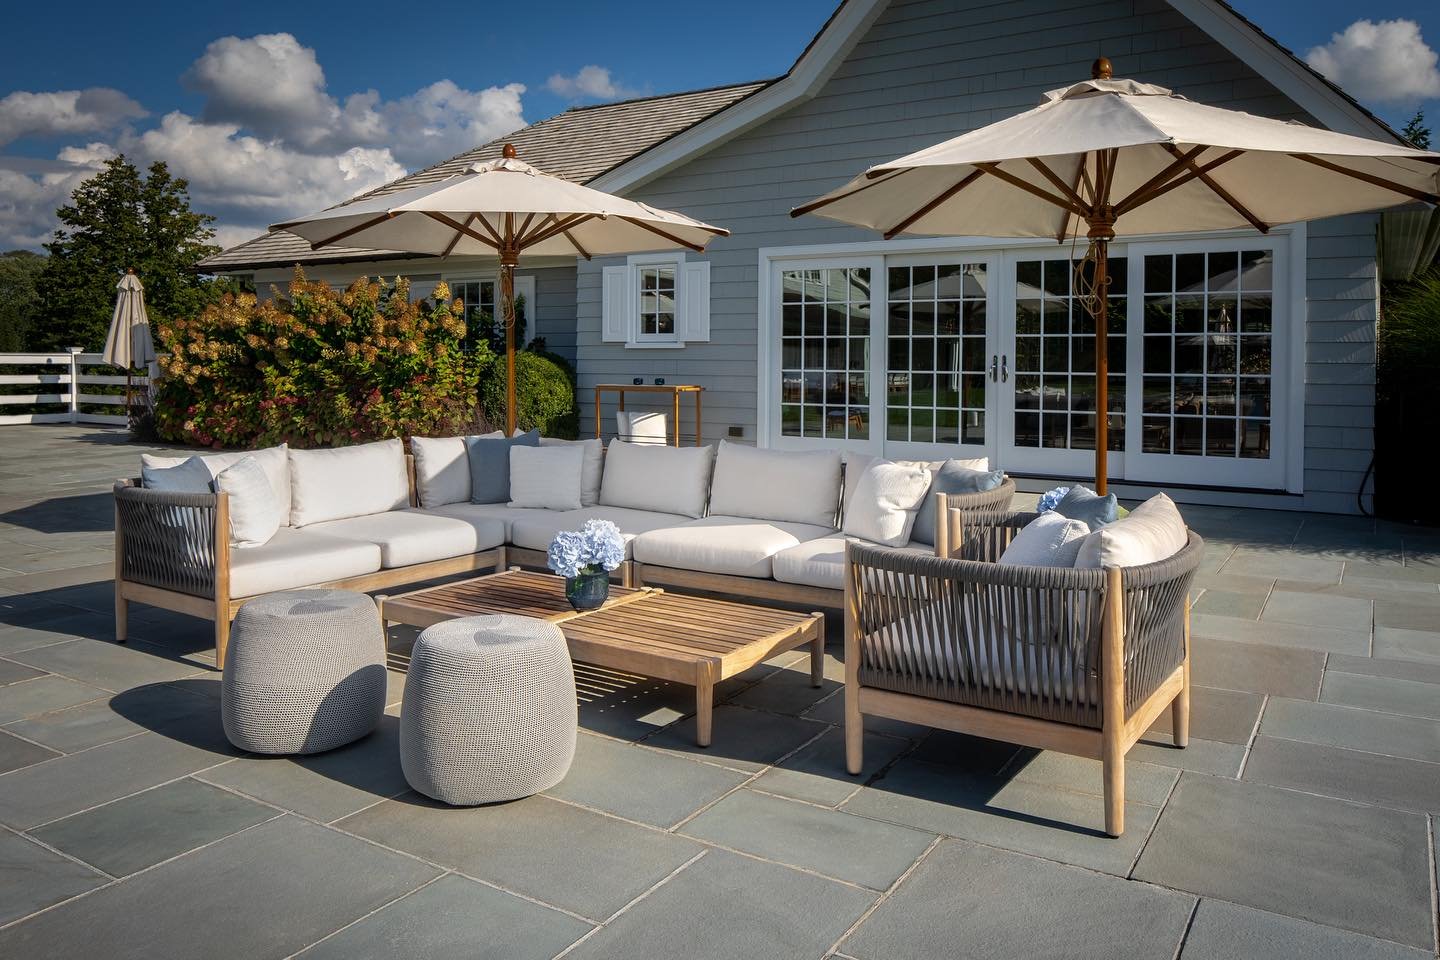 Revisiting one of our favorite installs.  We worked with the client to design multiple spaces and delivered within weeks, not months!  Our curated inventory and local warehouse allows us to create gorgeous outdoor spaces with shorter lead times.  But